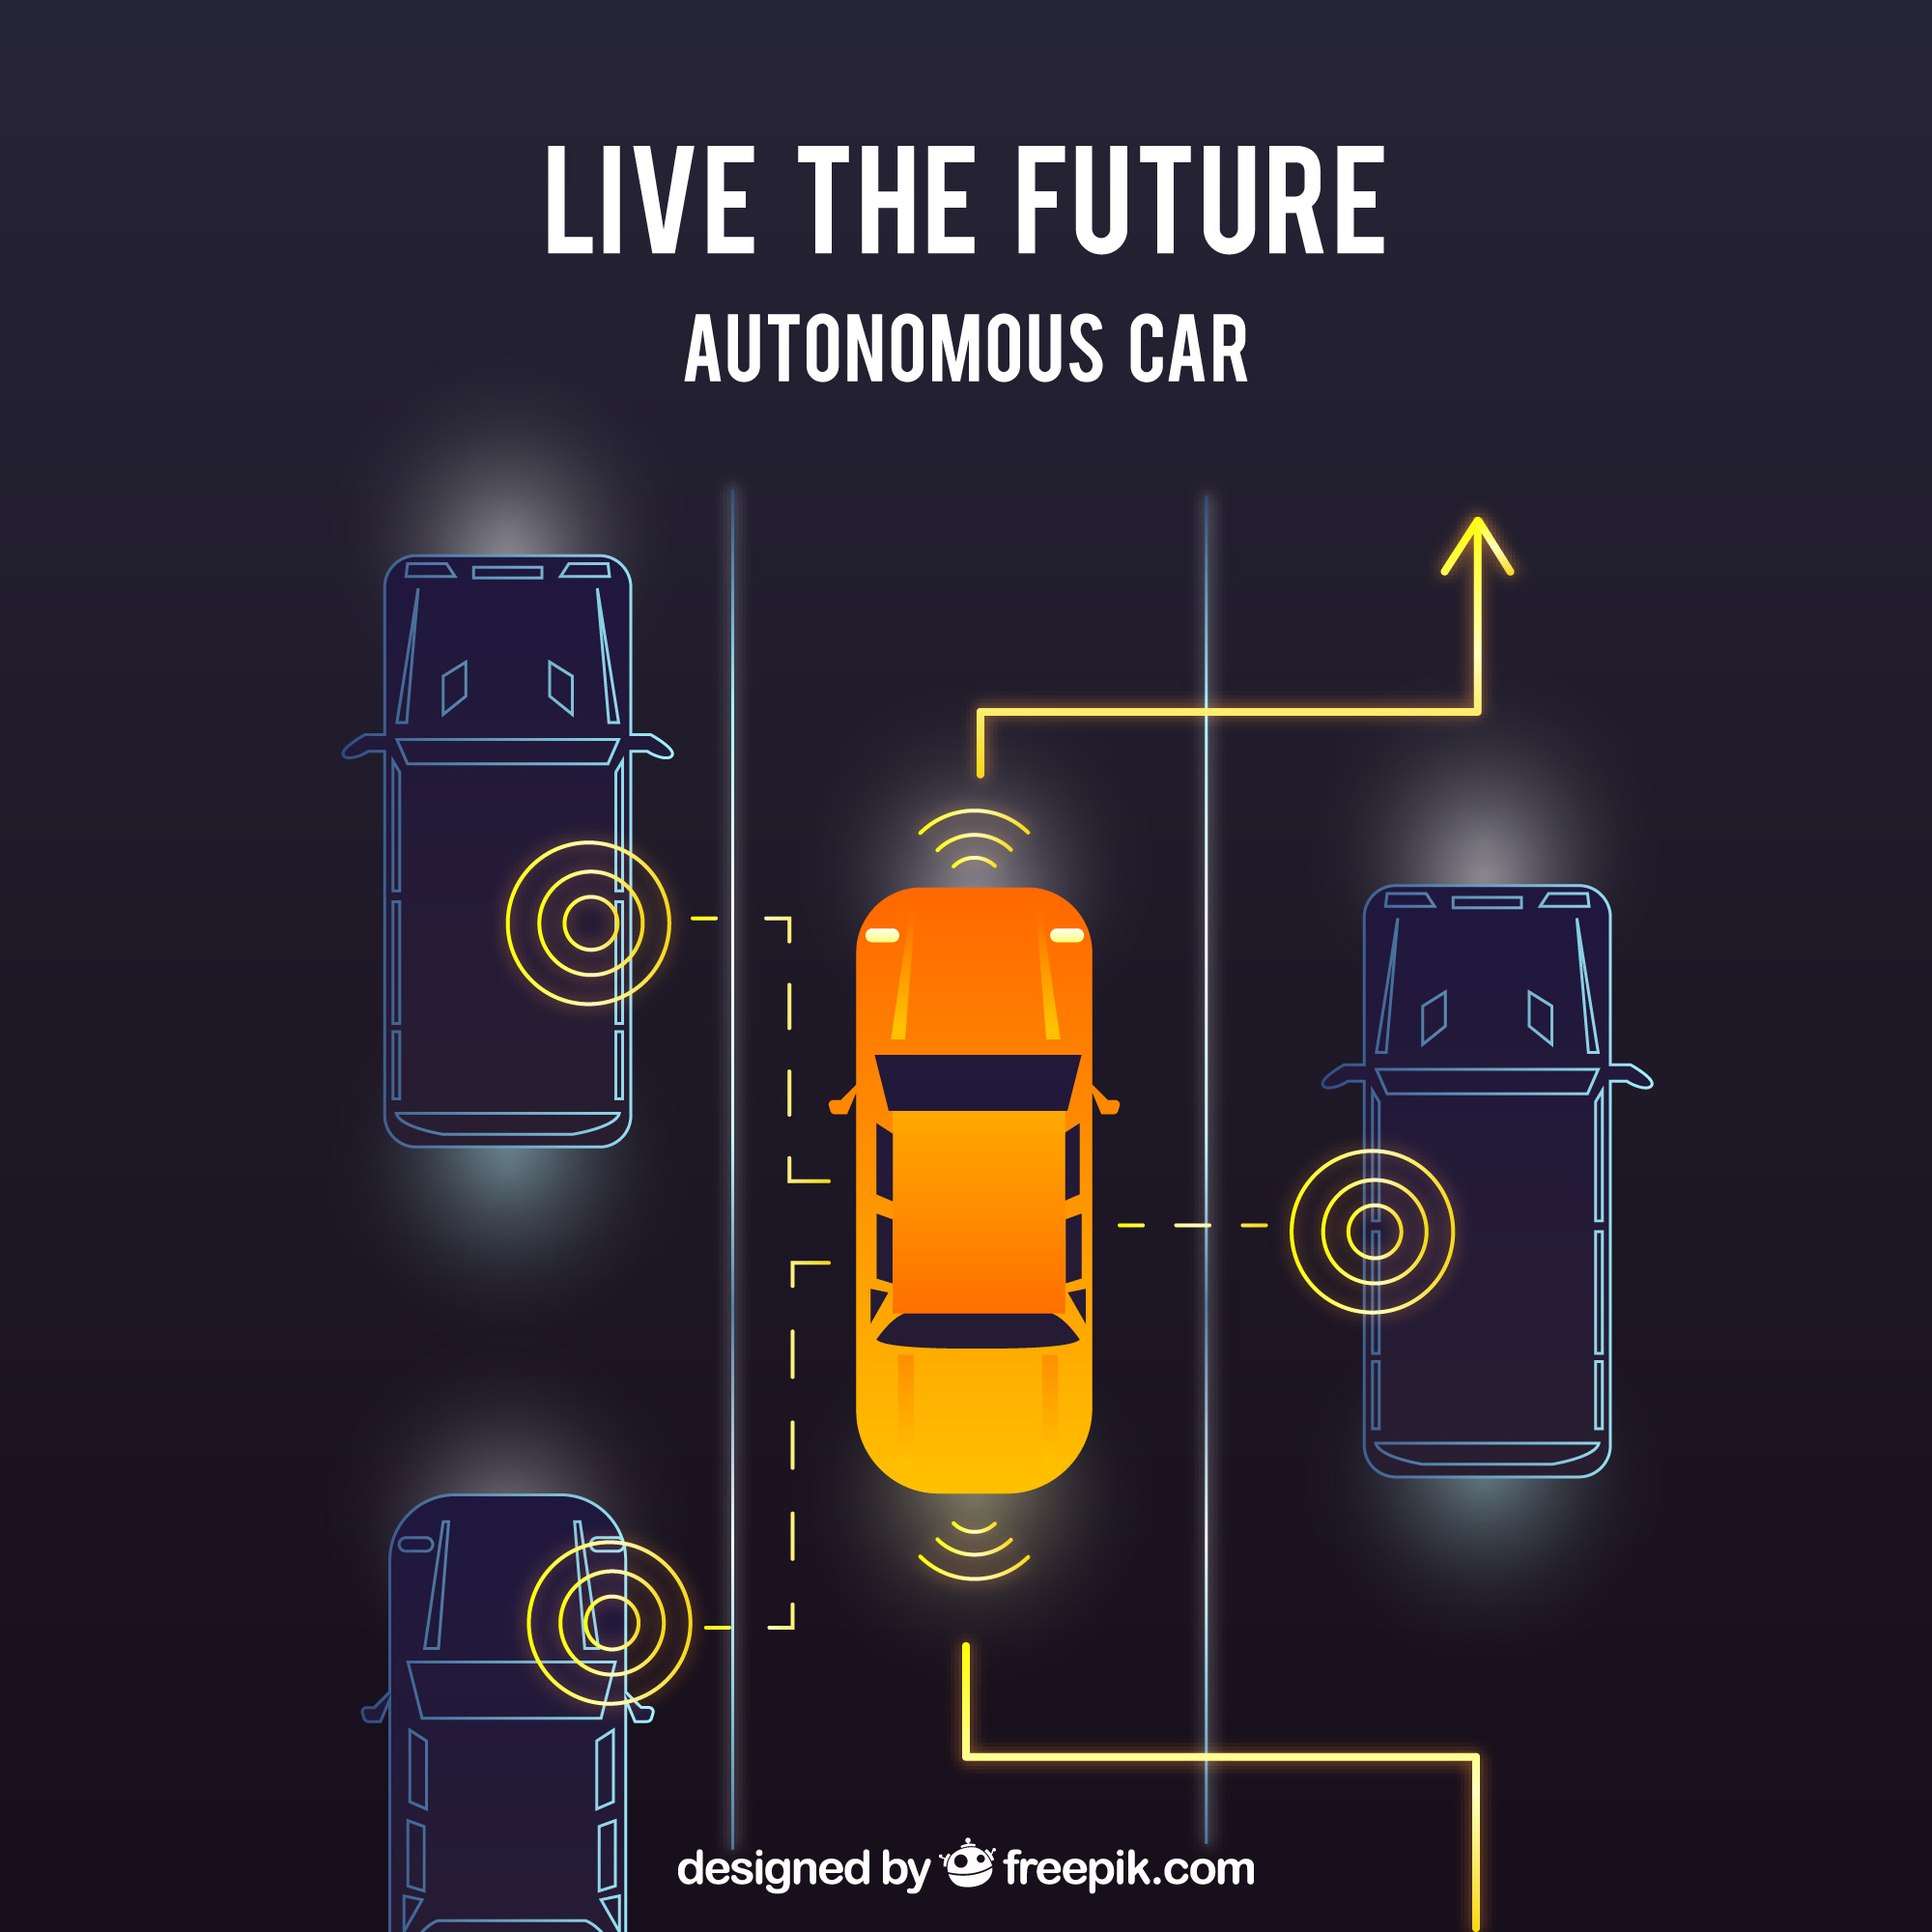 New Level 4 Autonomous Driving Regulation boosts Germany's future in driverless mobility 4